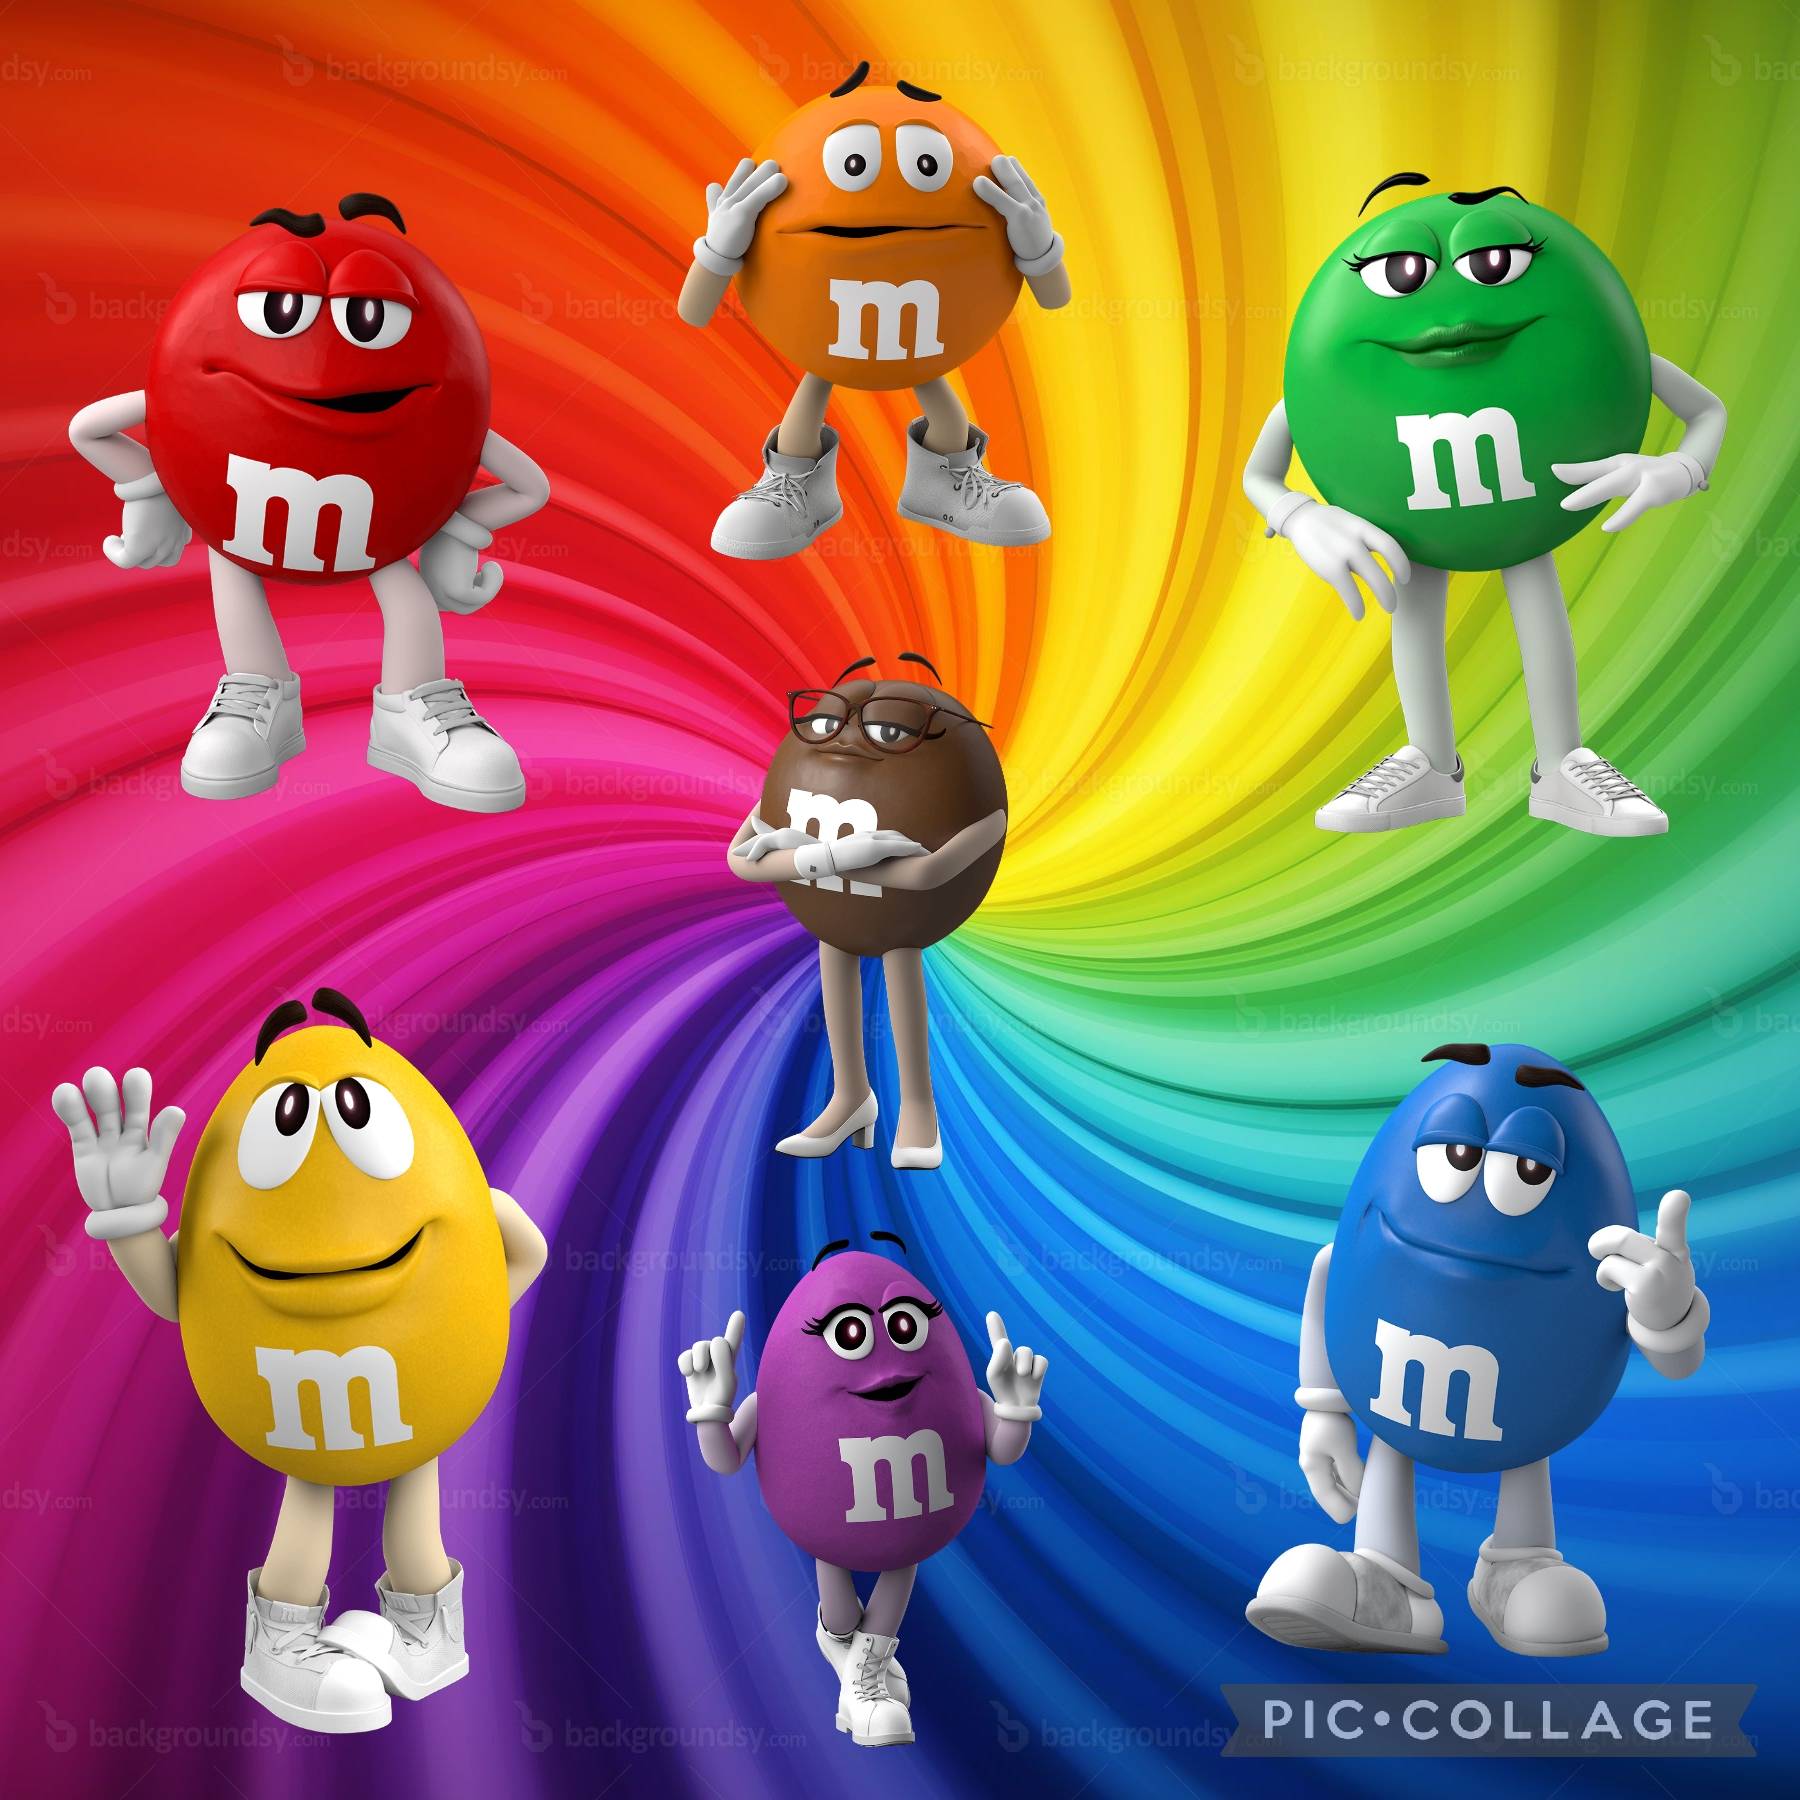 M and M chocolate blue by Lemongraphic on DeviantArt